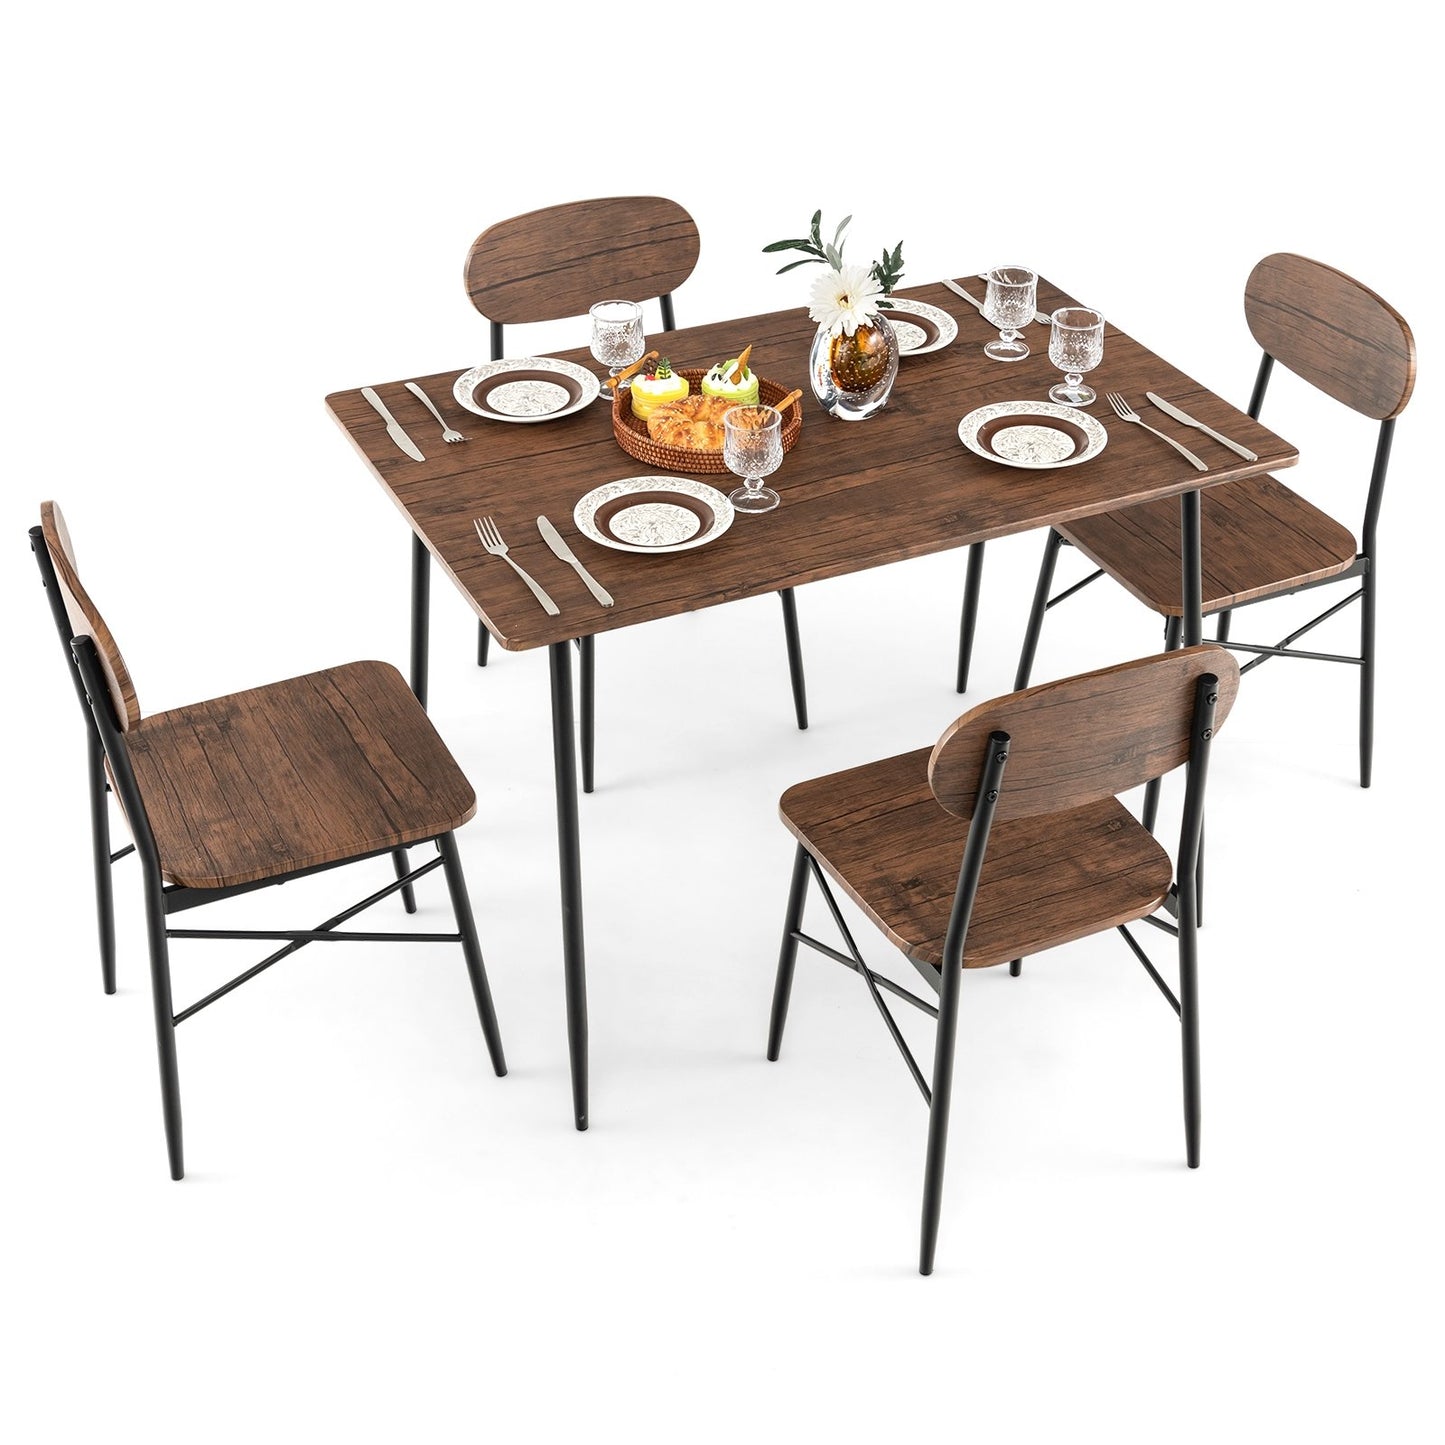 5 Piece Dining Table Set Rectangular with Backrest and Metal Legs for Breakfast Nook, Rustic Brown